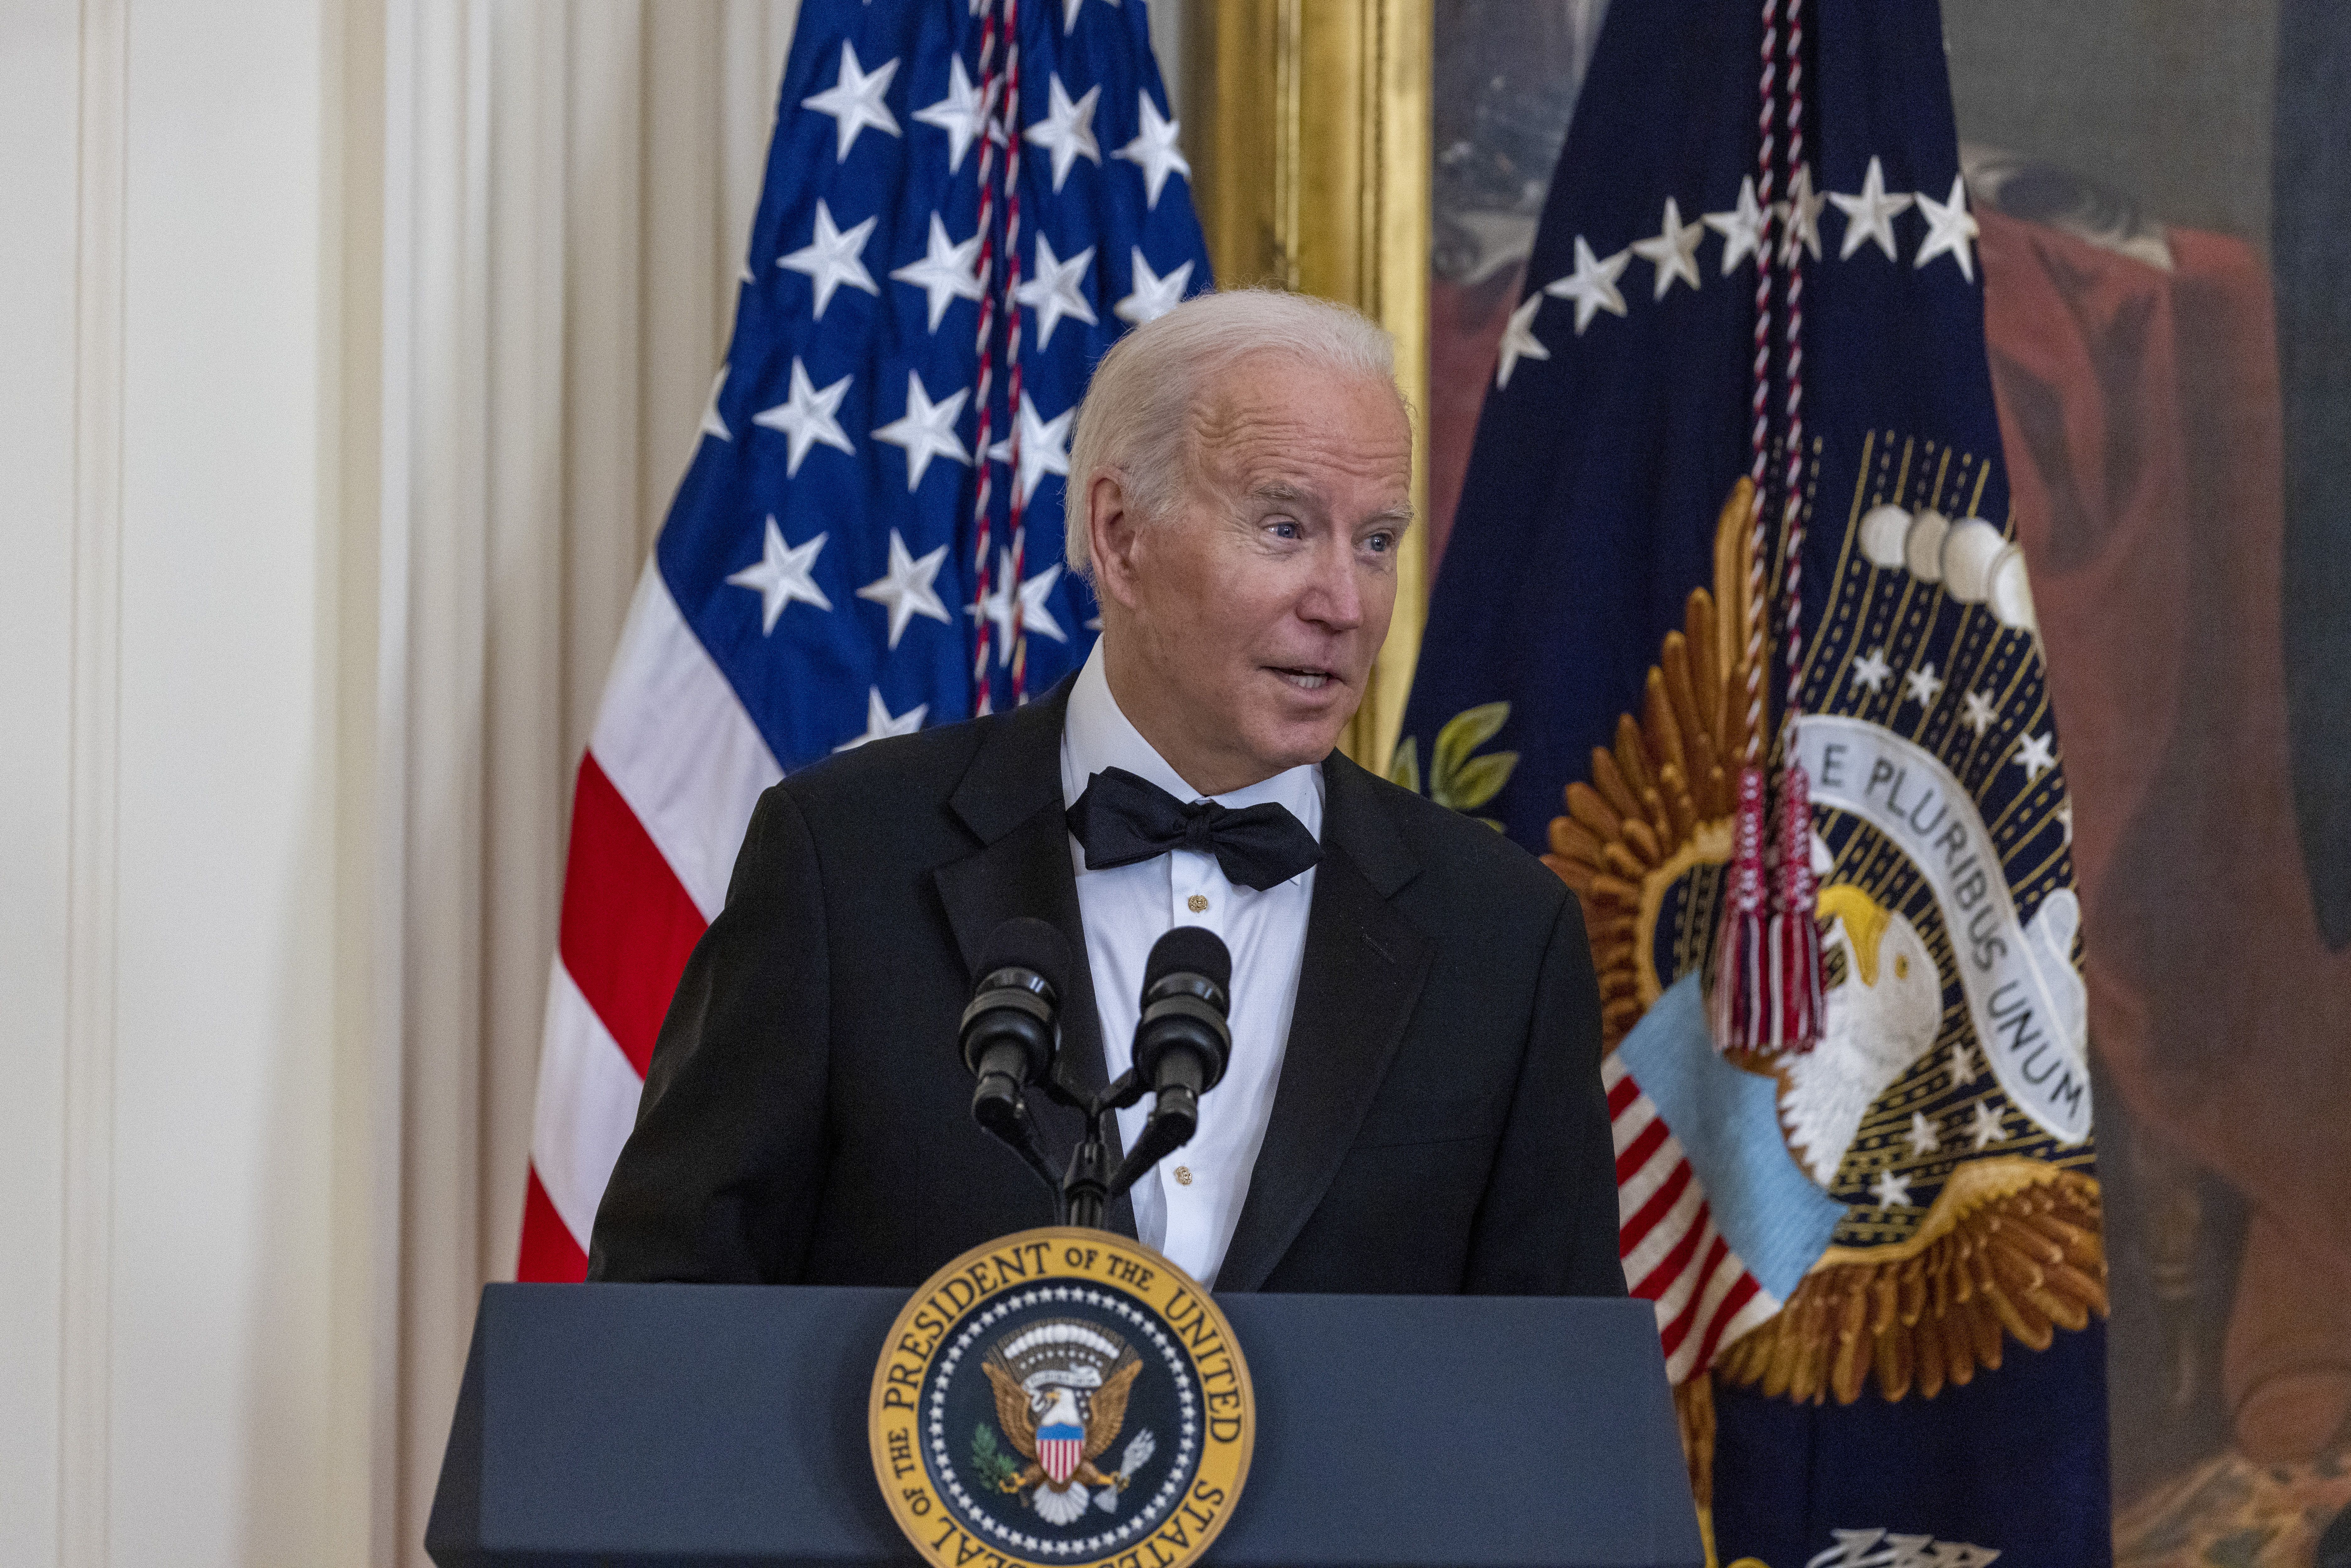 Biden addresses guests and this year's honorees in the East Room of the White House